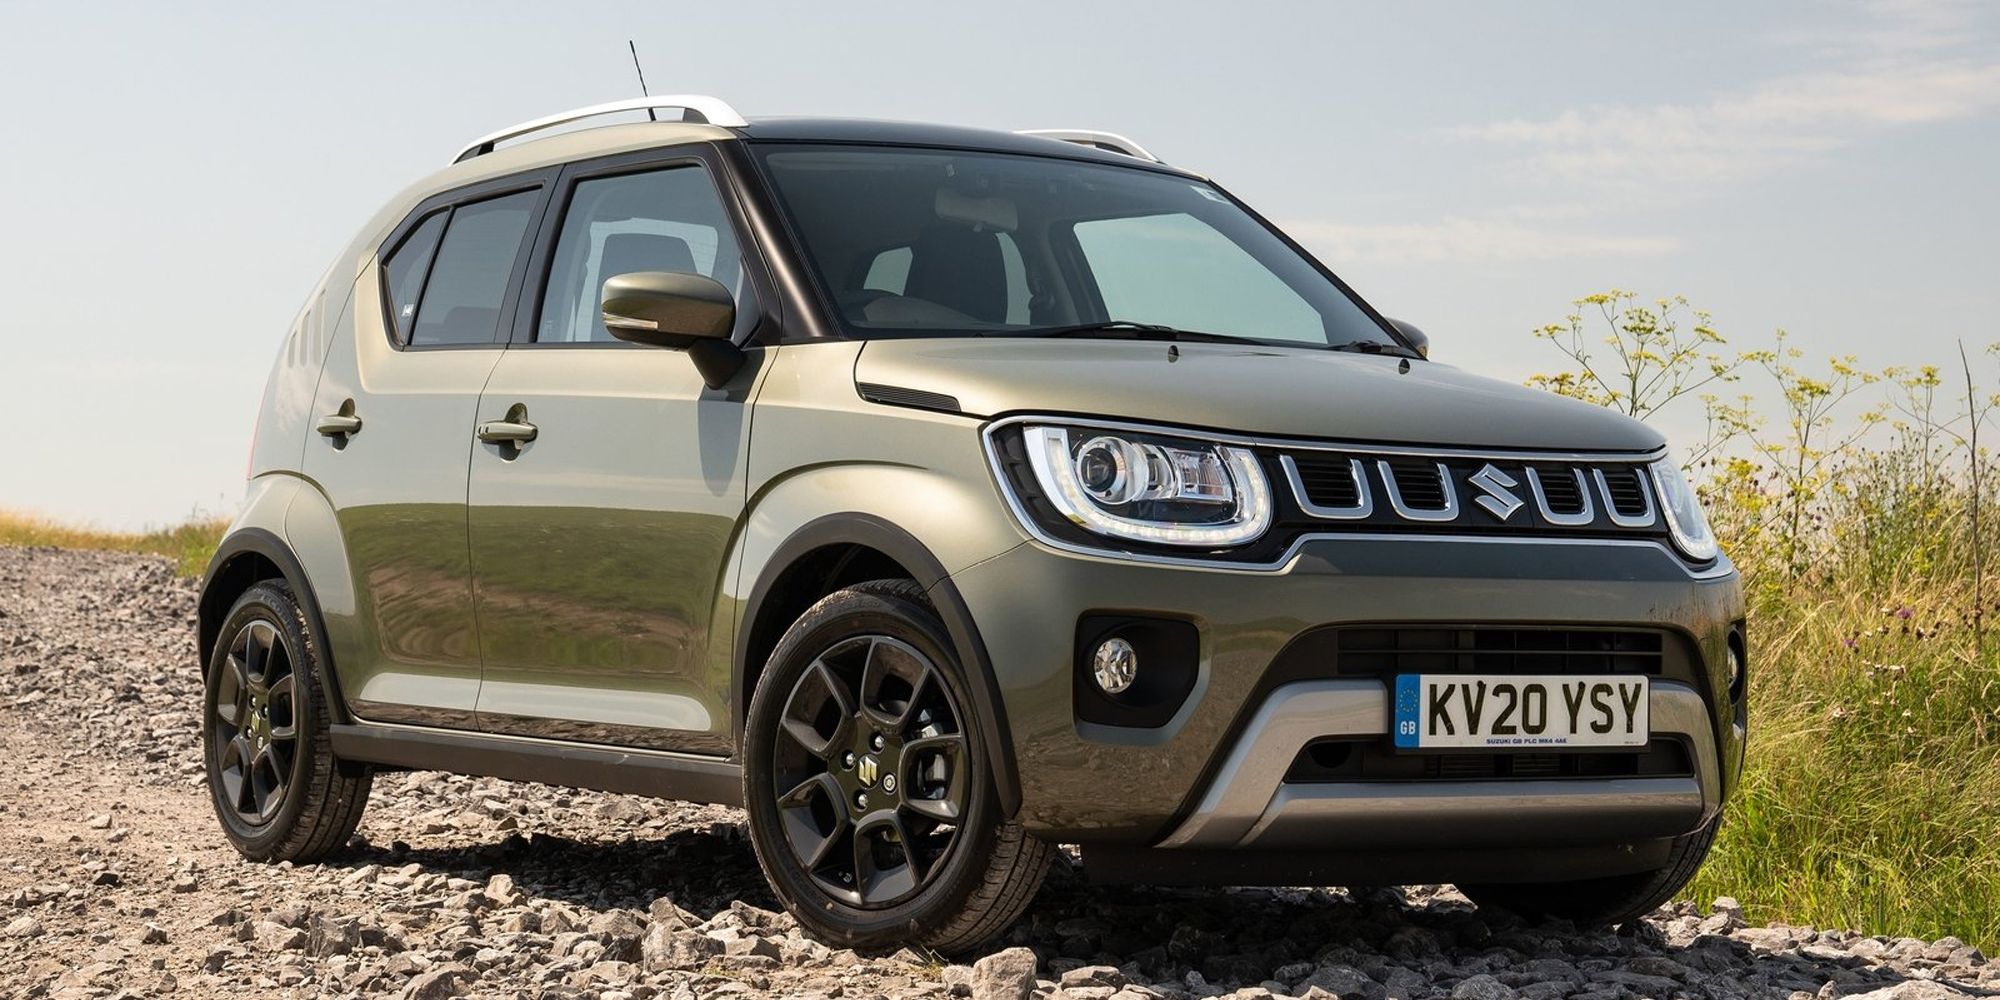 The front of the Suzuki Ignis